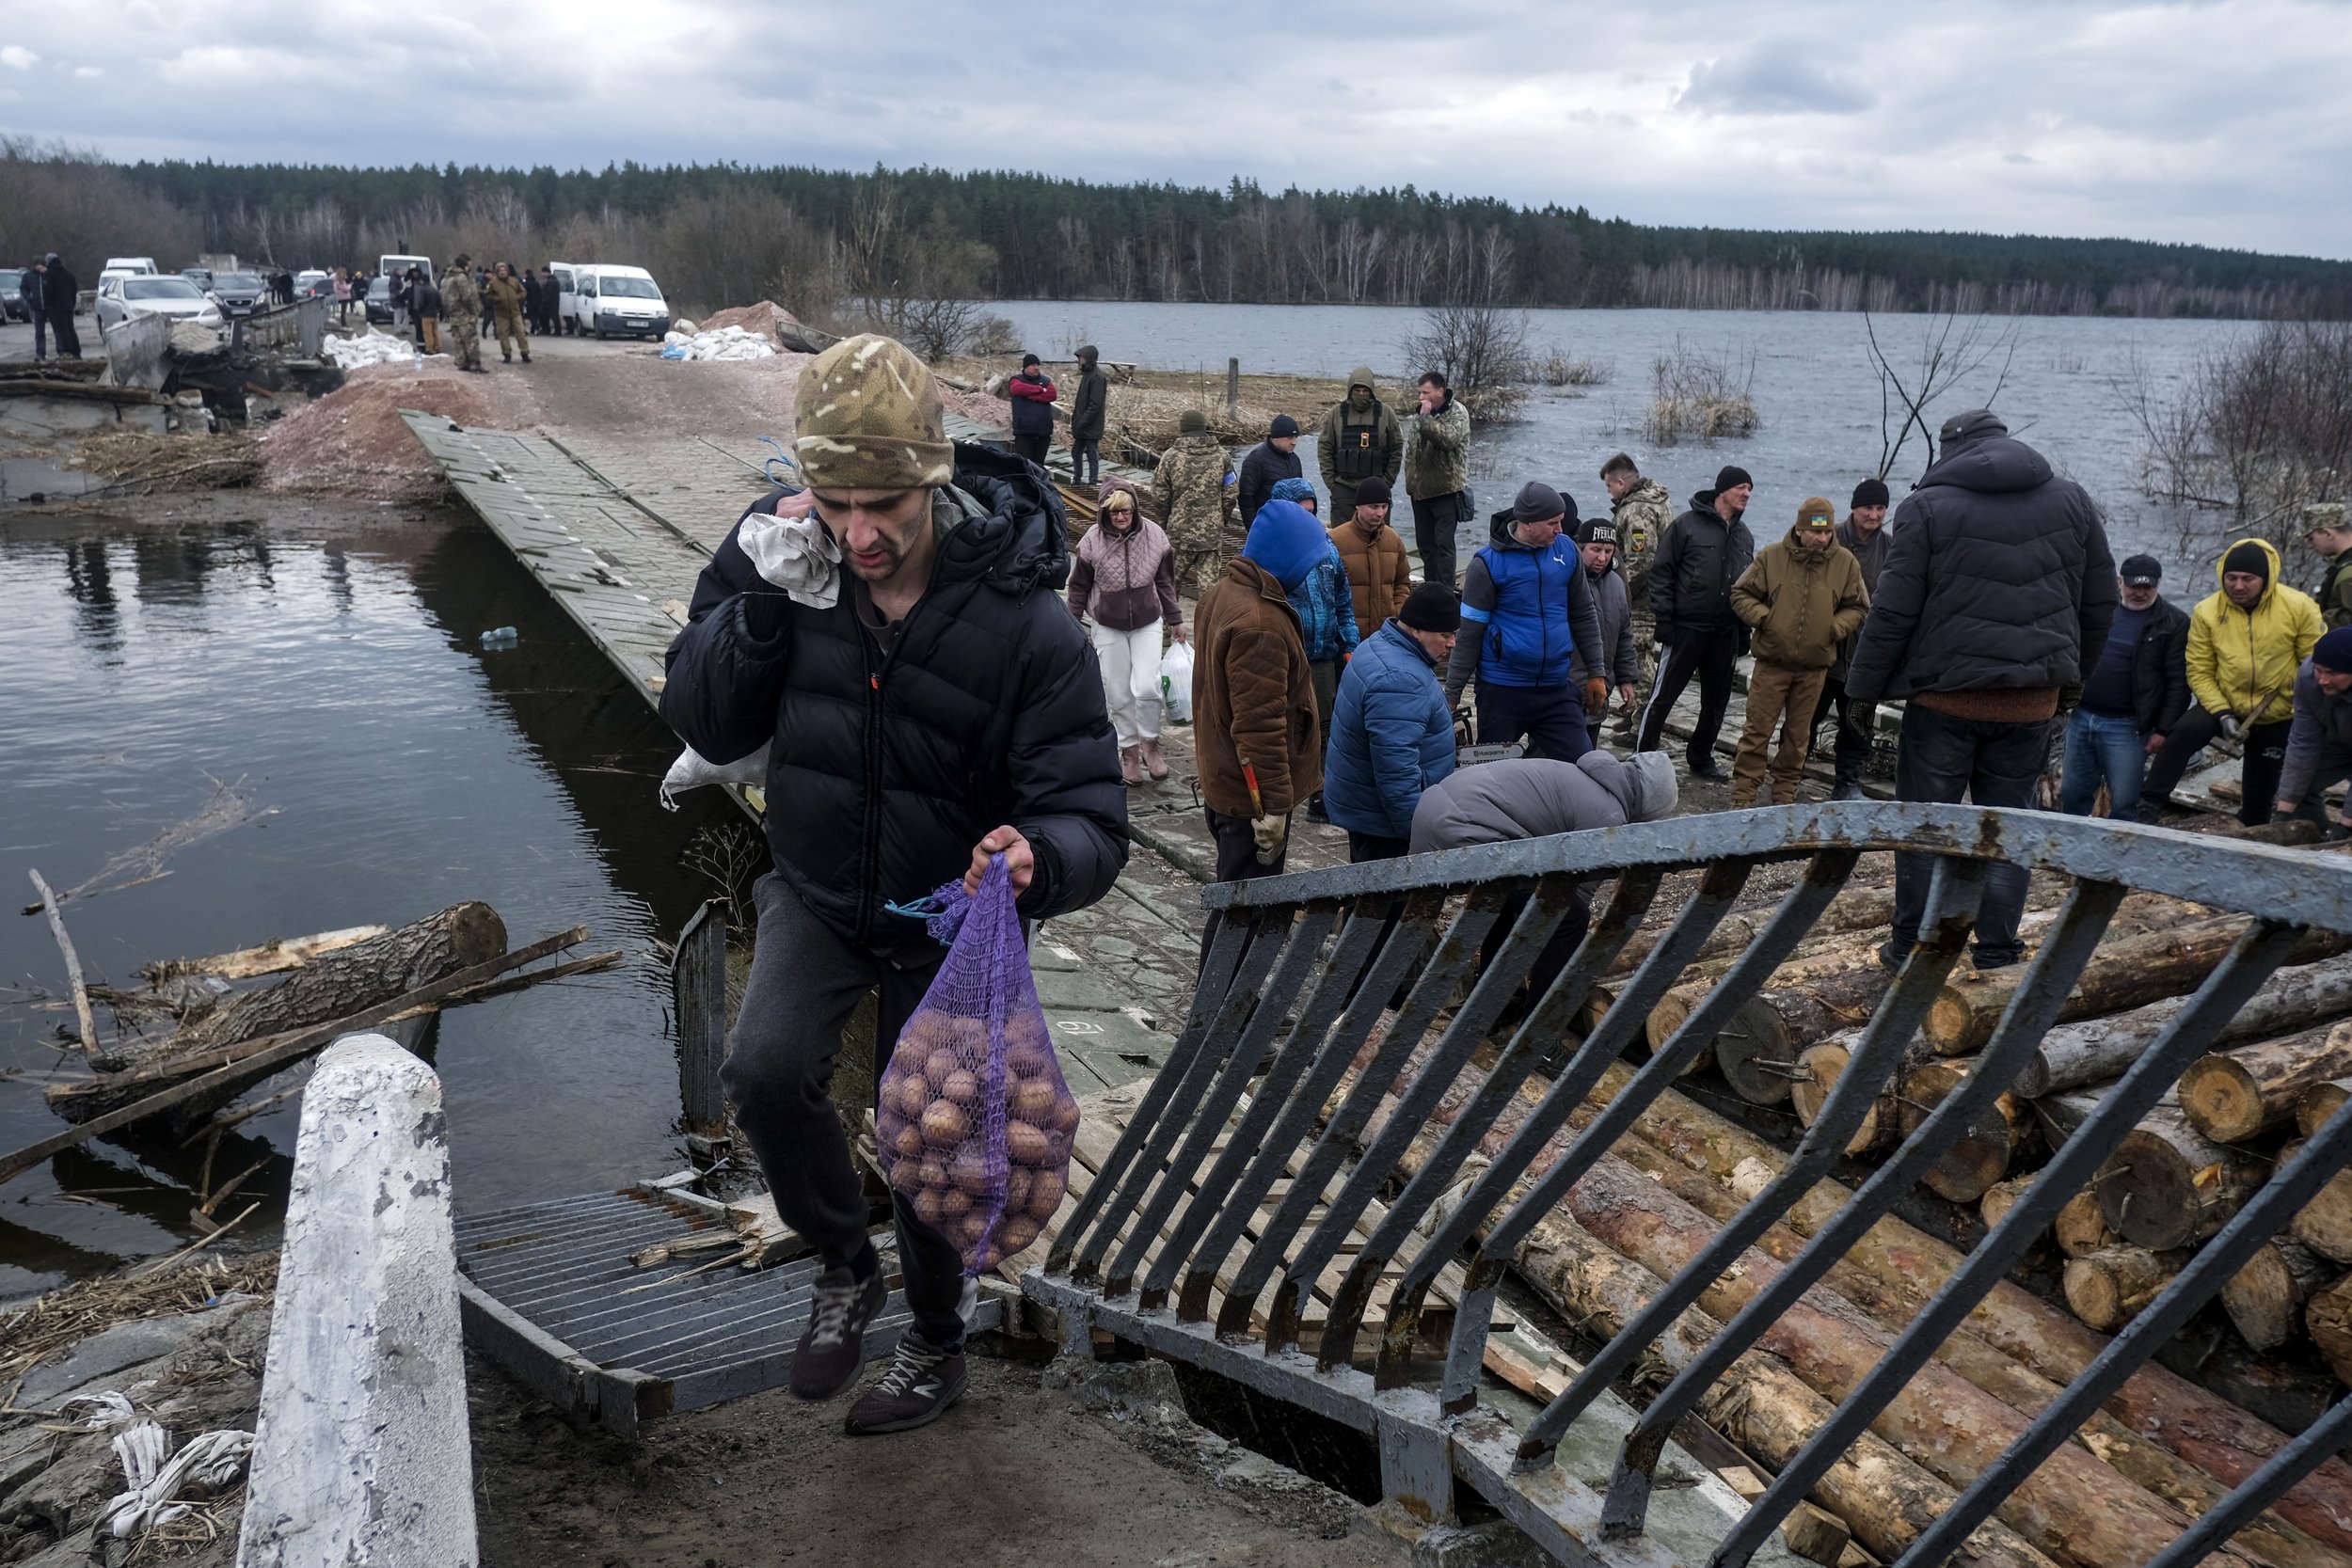  Civilians return to the flooded town of Demidiv, Ukraine after Ukrainian forces pushed out Russian troops from the Kyiv region on April 5, 2022. Heavy fighting during the battle of Kyiv destroyed many of the towns and villages surrounding the capita